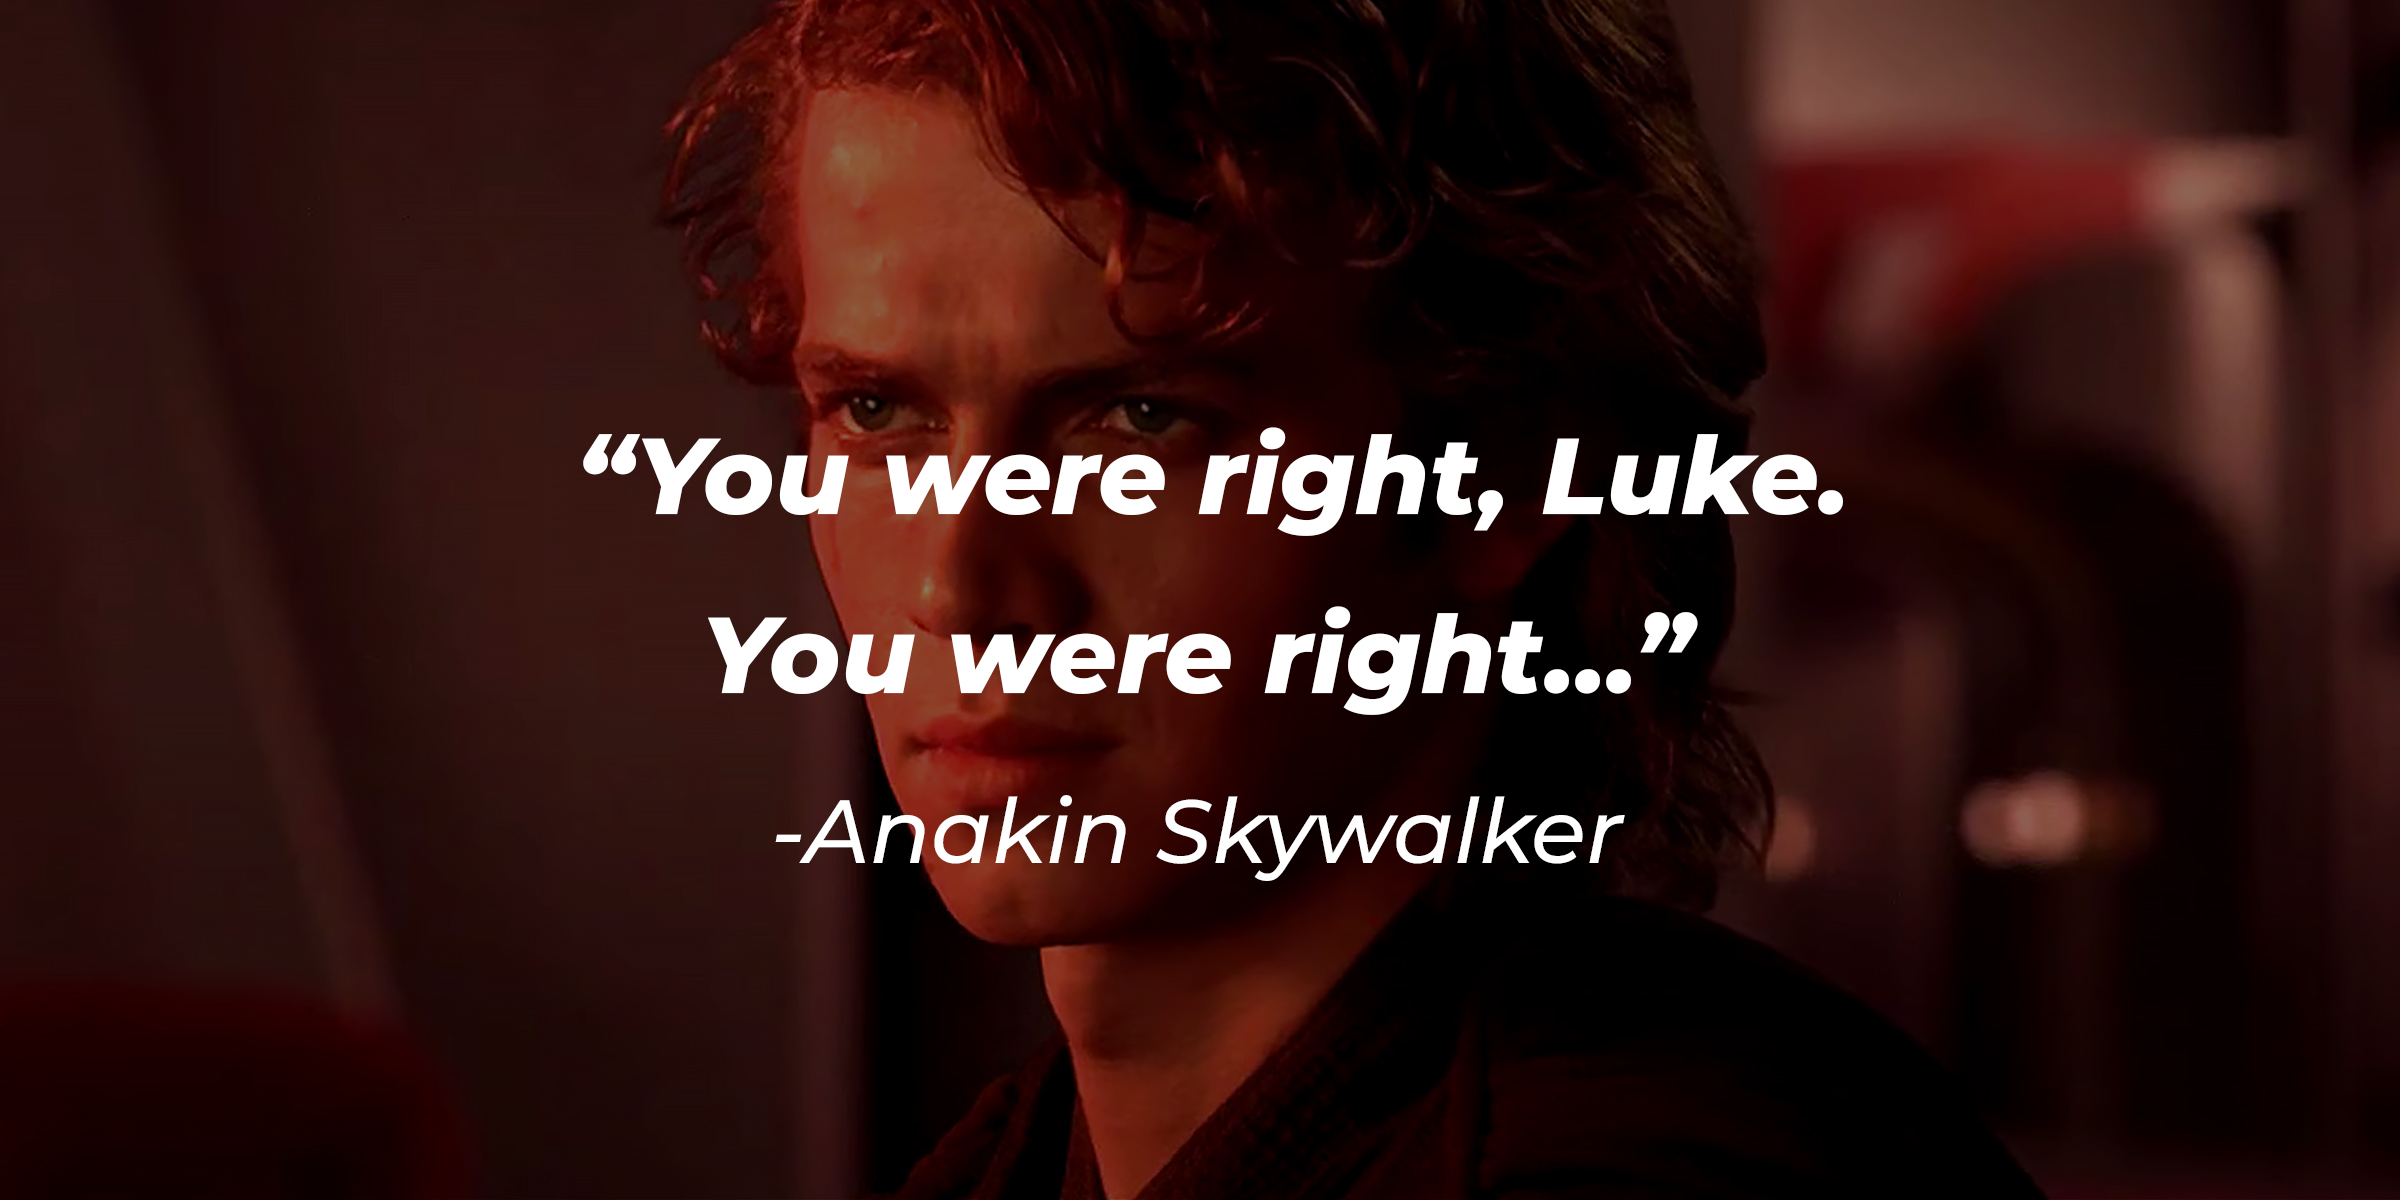 Anakin Skywalker, with his quote: "You were right, Luke. You were right…” | Source: Facebook.com/StarWars